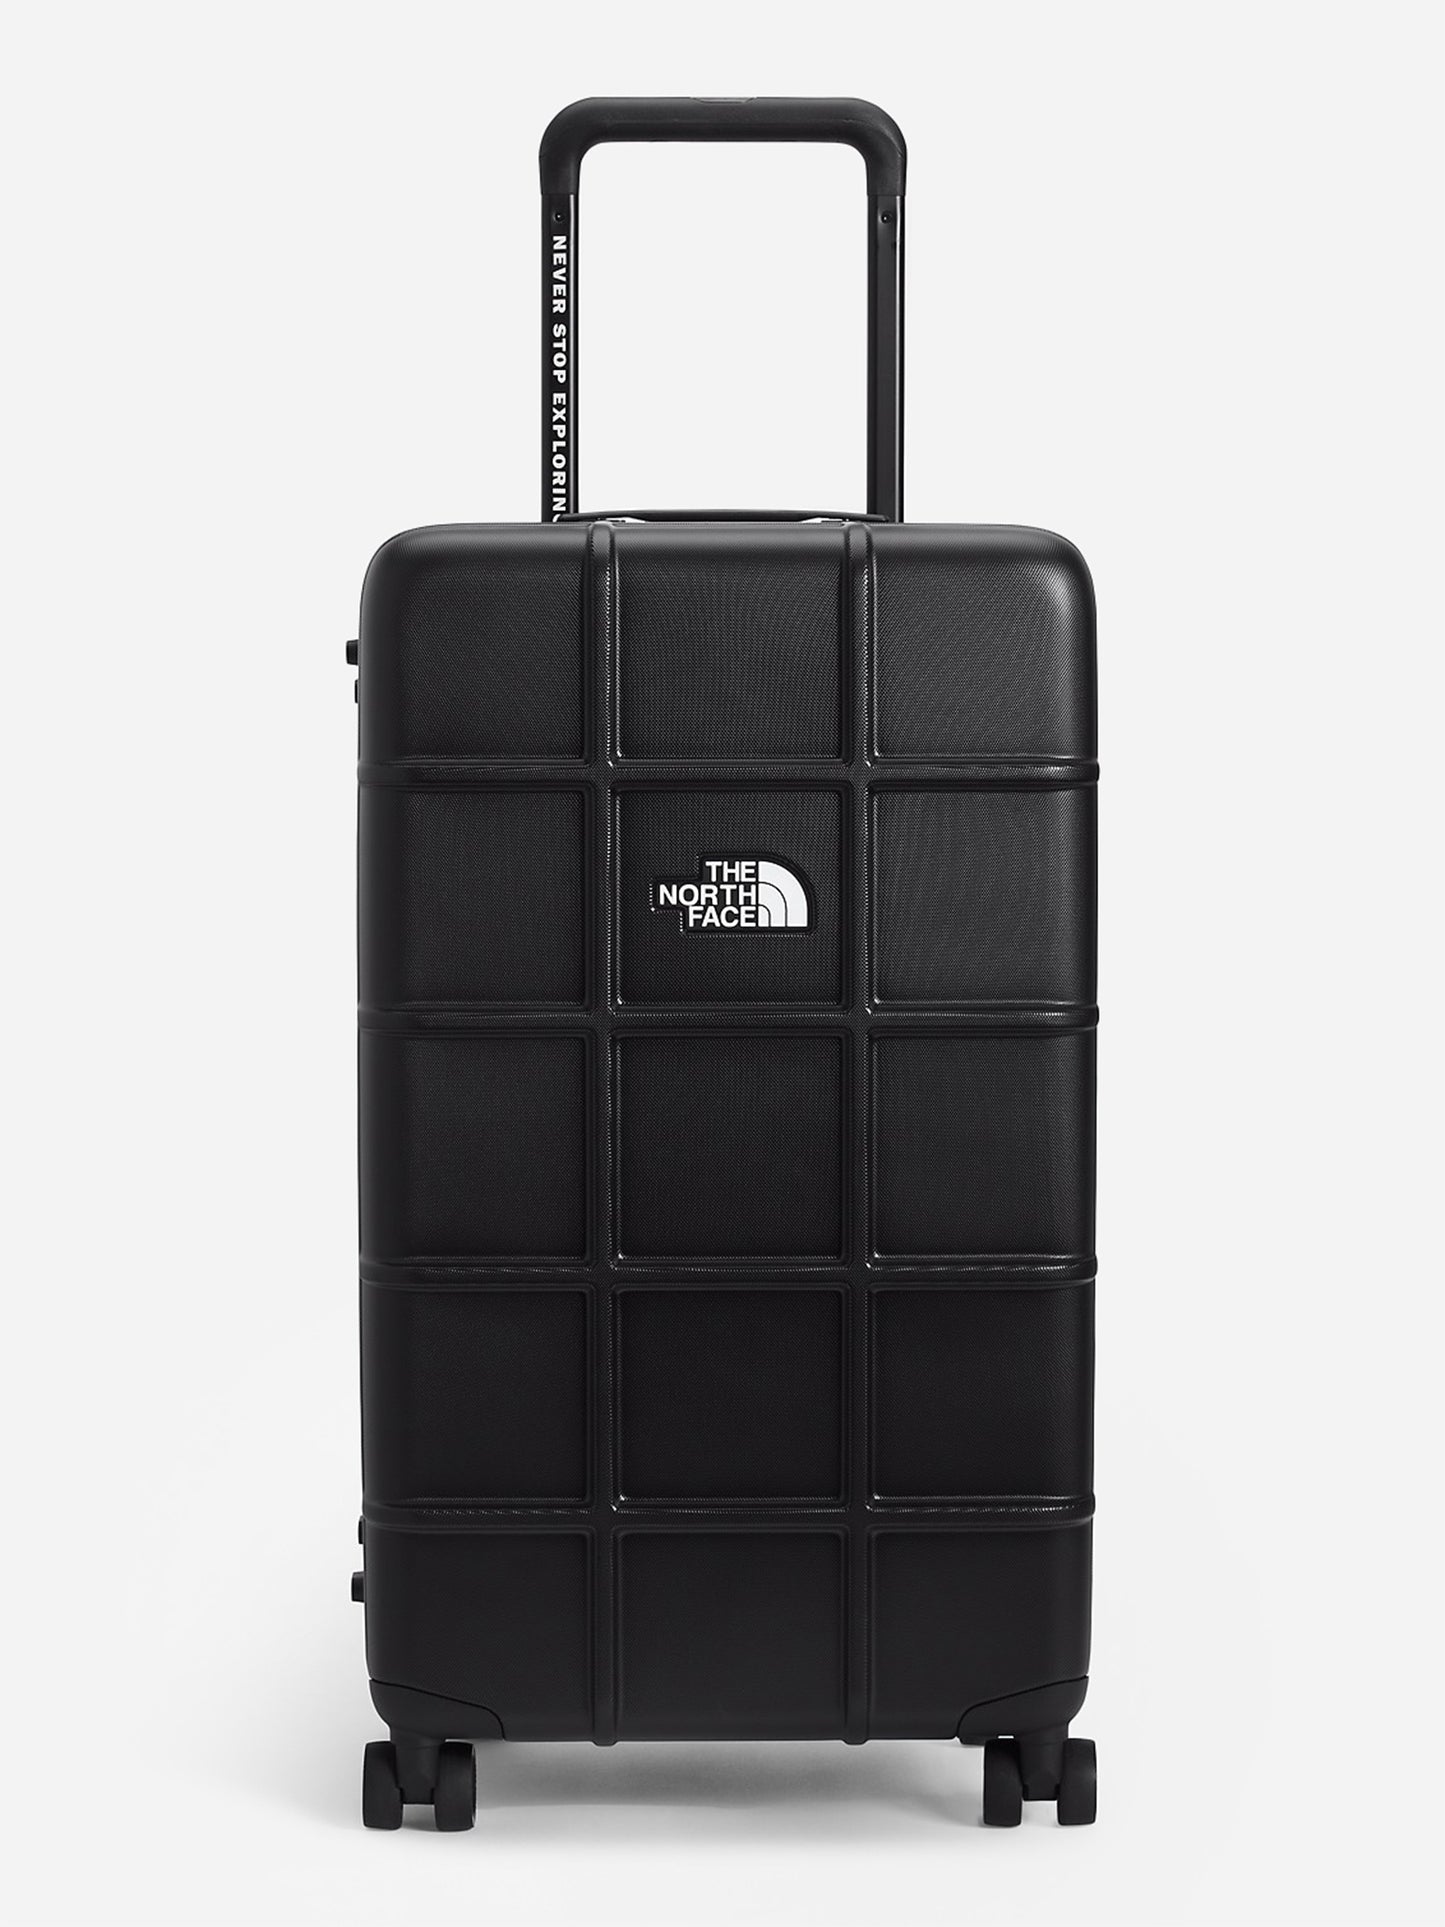 The North Face All Weather 4-Wheeler—30" Suitcase